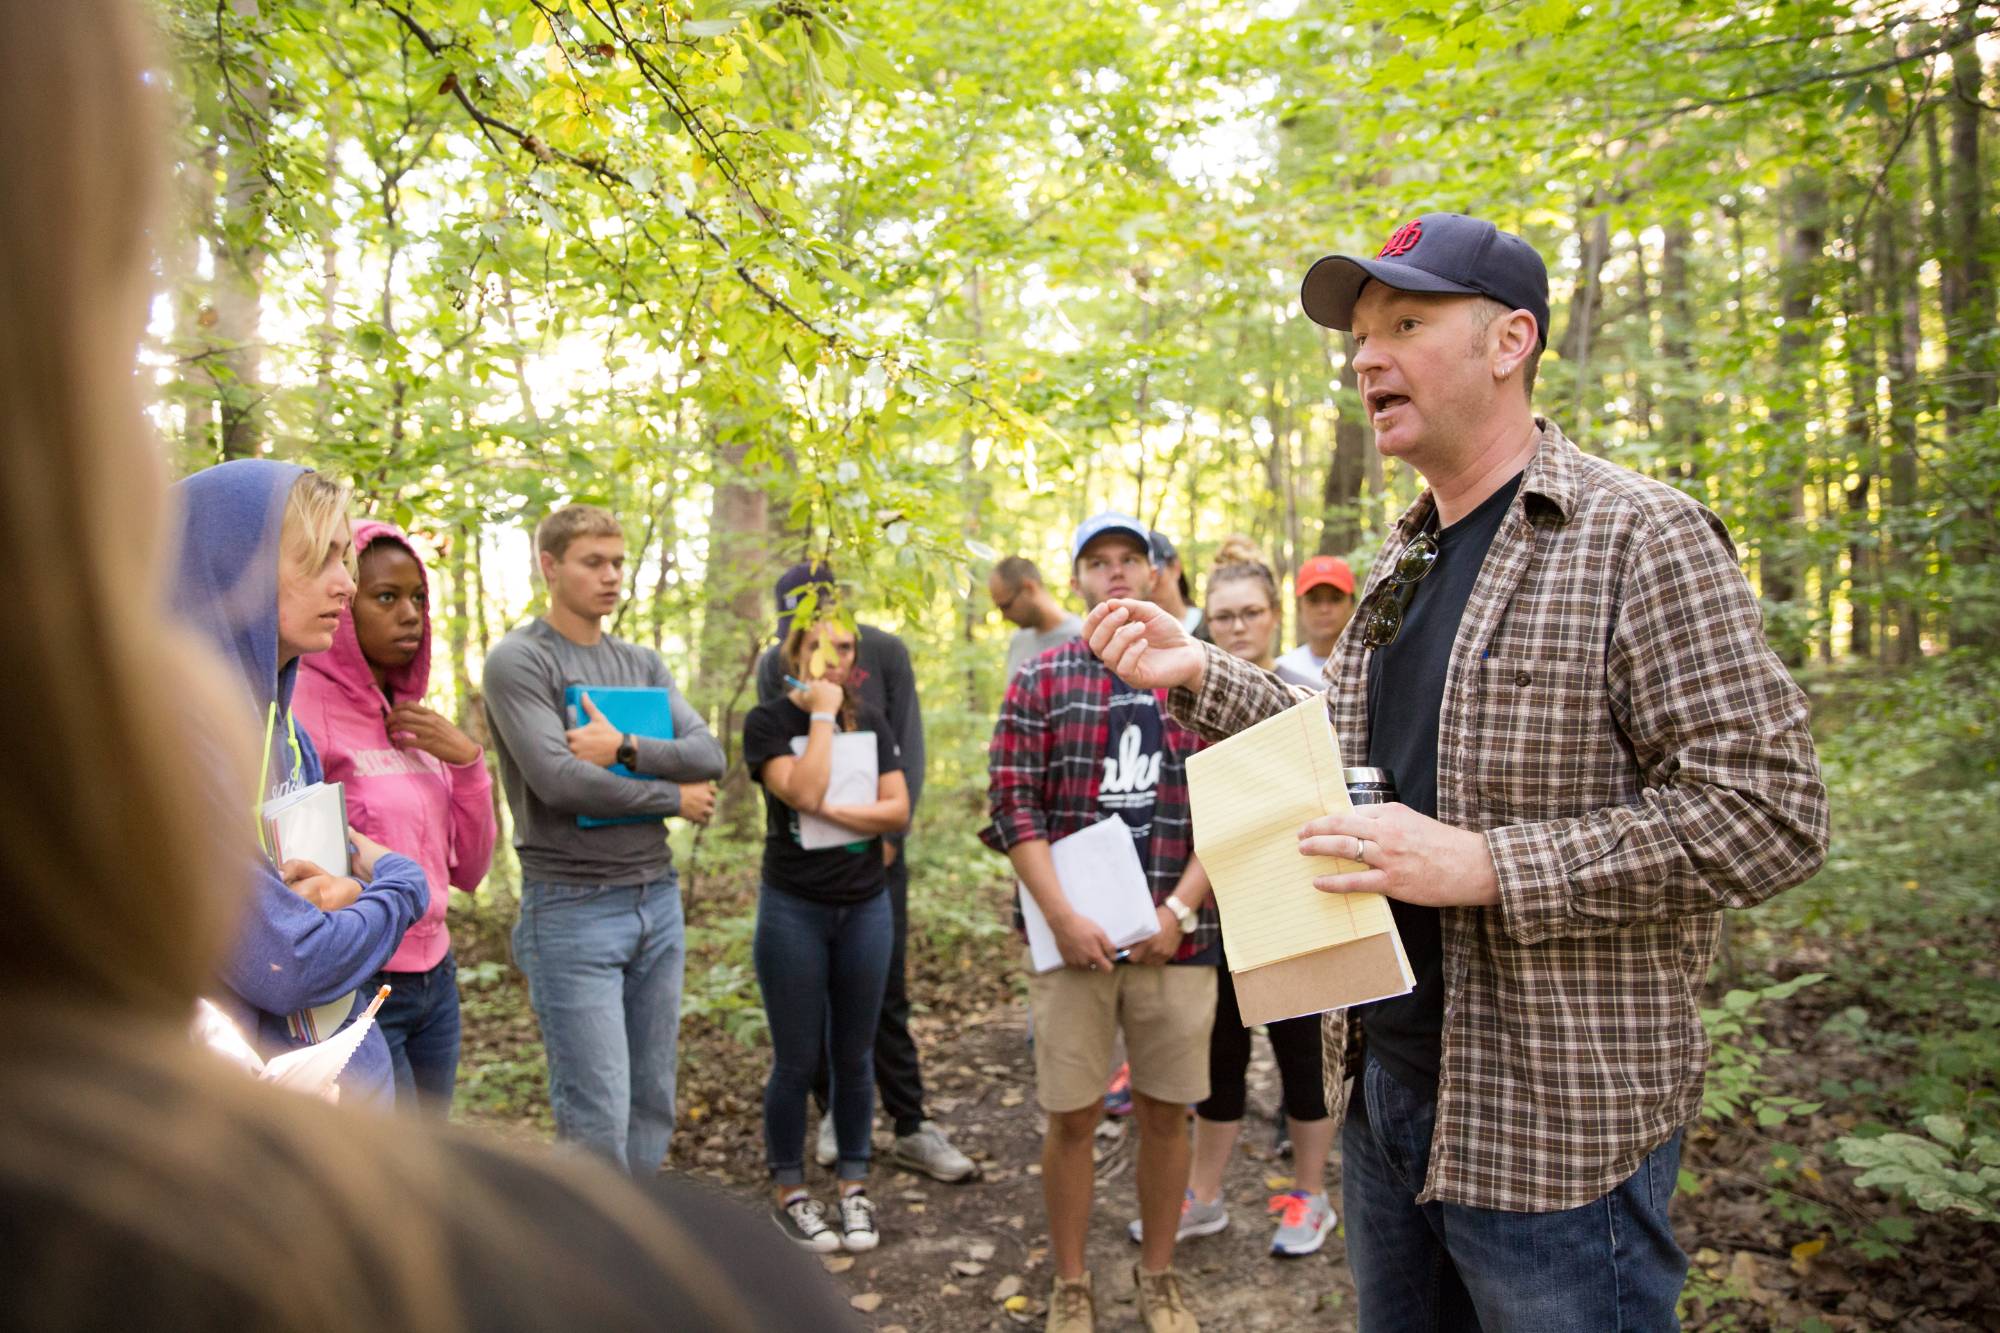 Integrated Science professor speaks to students outdoors; students are holding binders and papers.